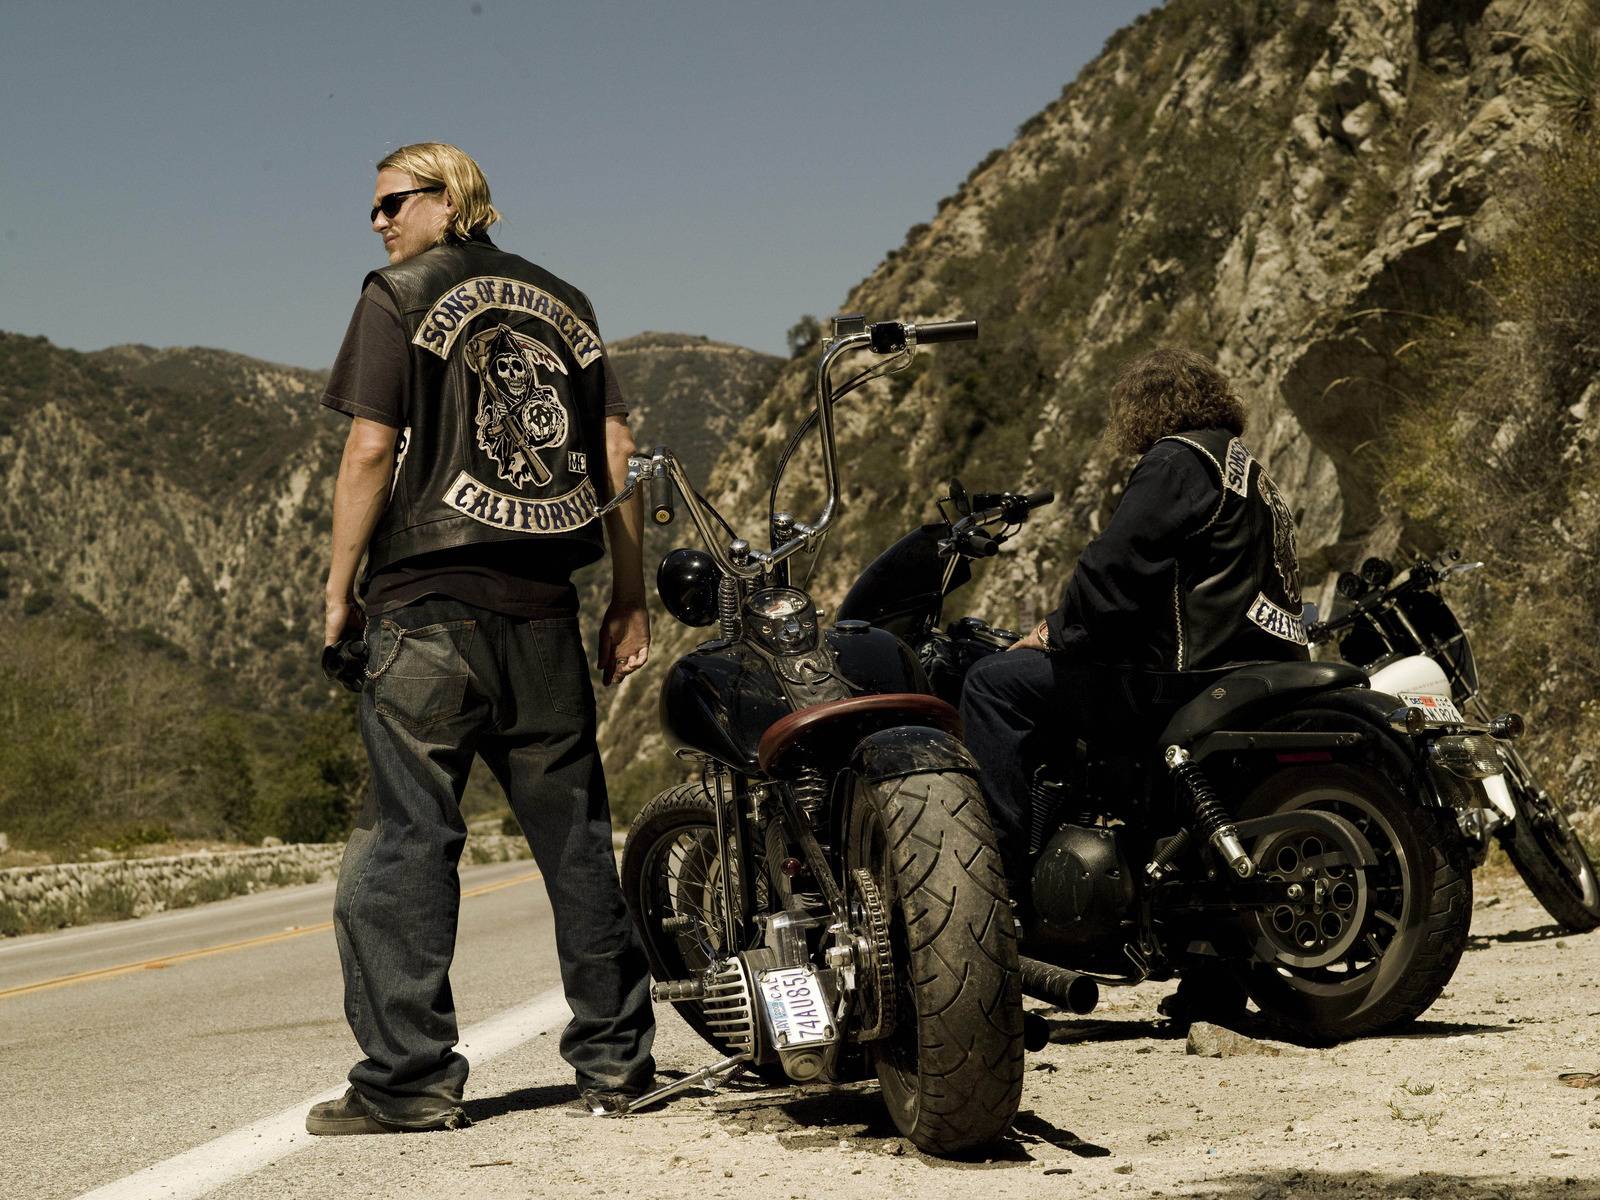 Sons of Anarchy&; Goes Out Strong in Final Chapter